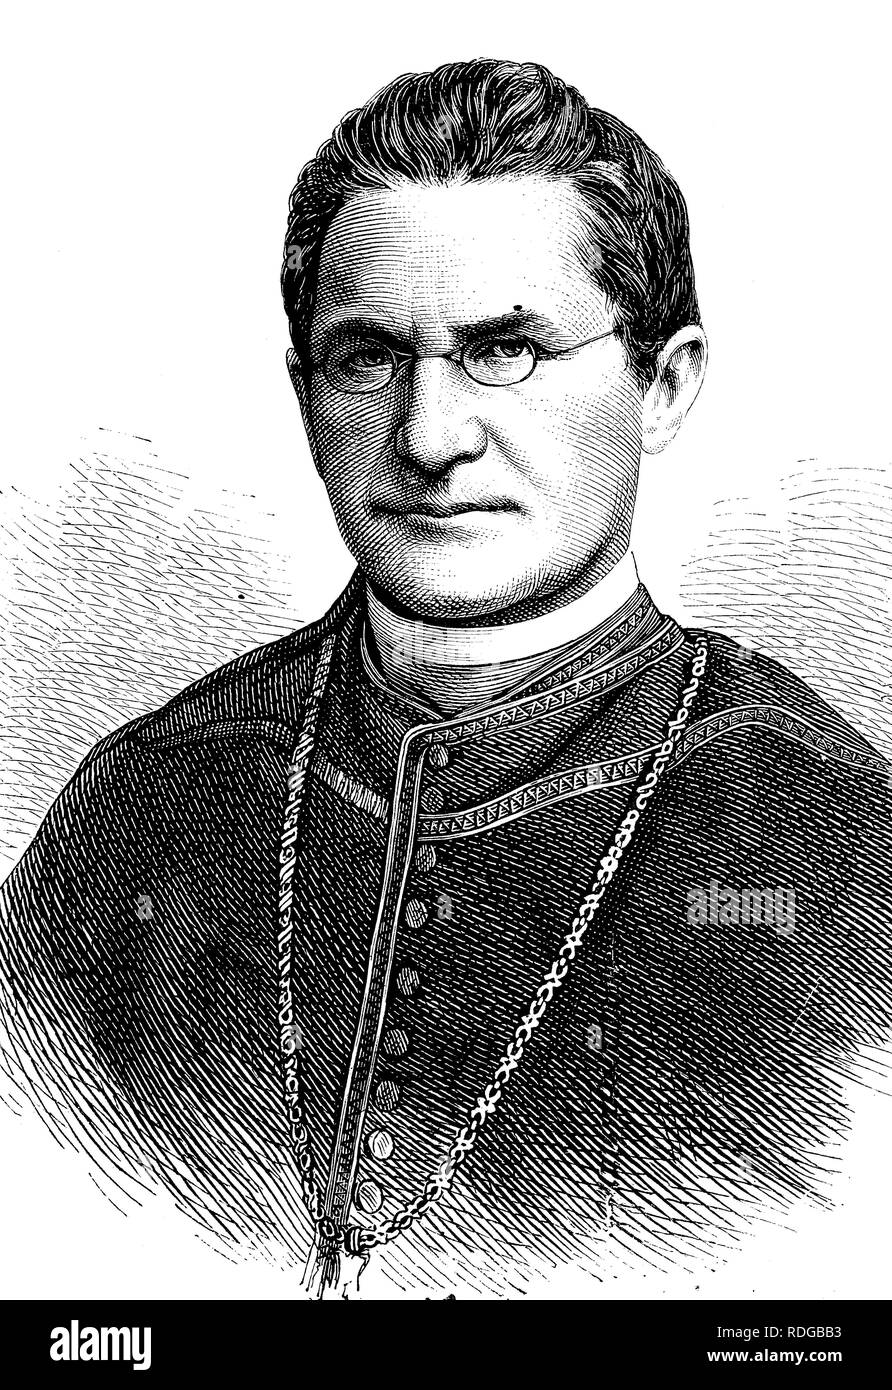 Auxiliary Bishop Lothar von Kuebel, administrator of the Archdiocese of Freiburg, 1823 - 1881, historical illustration, 1877 Stock Photo